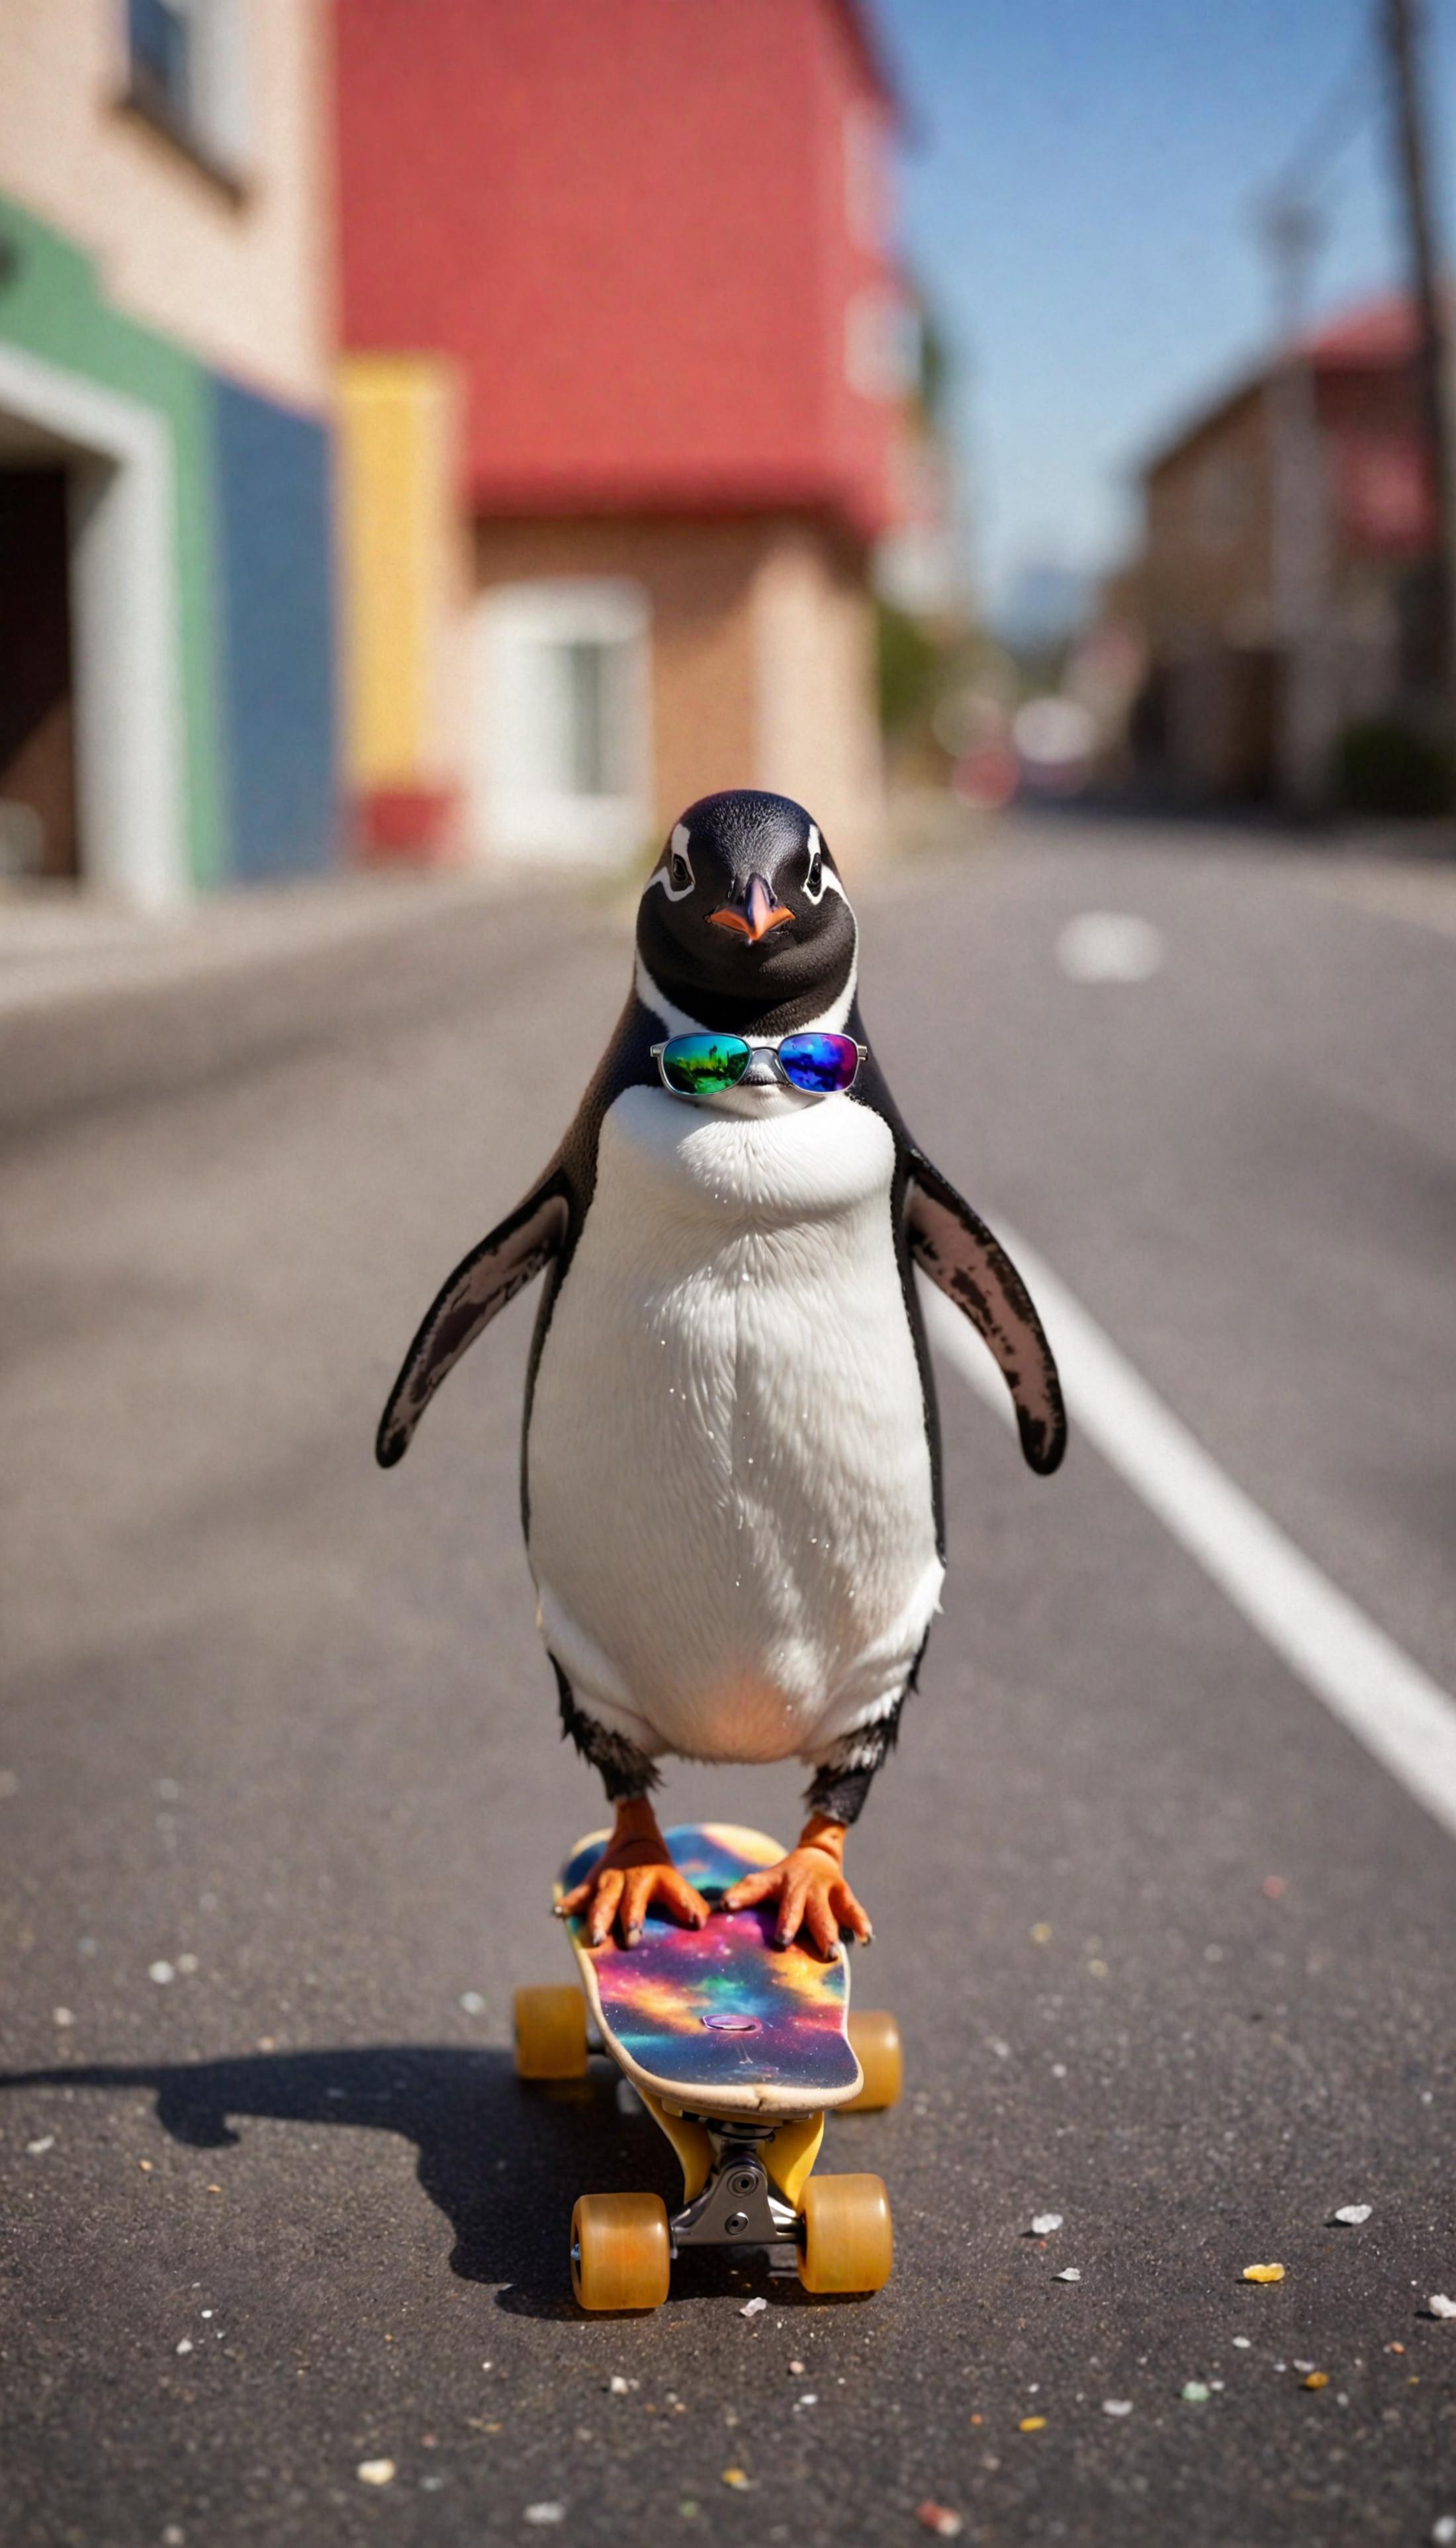 A penguin wearing sunglasses and a tie is skateboarding down the street.